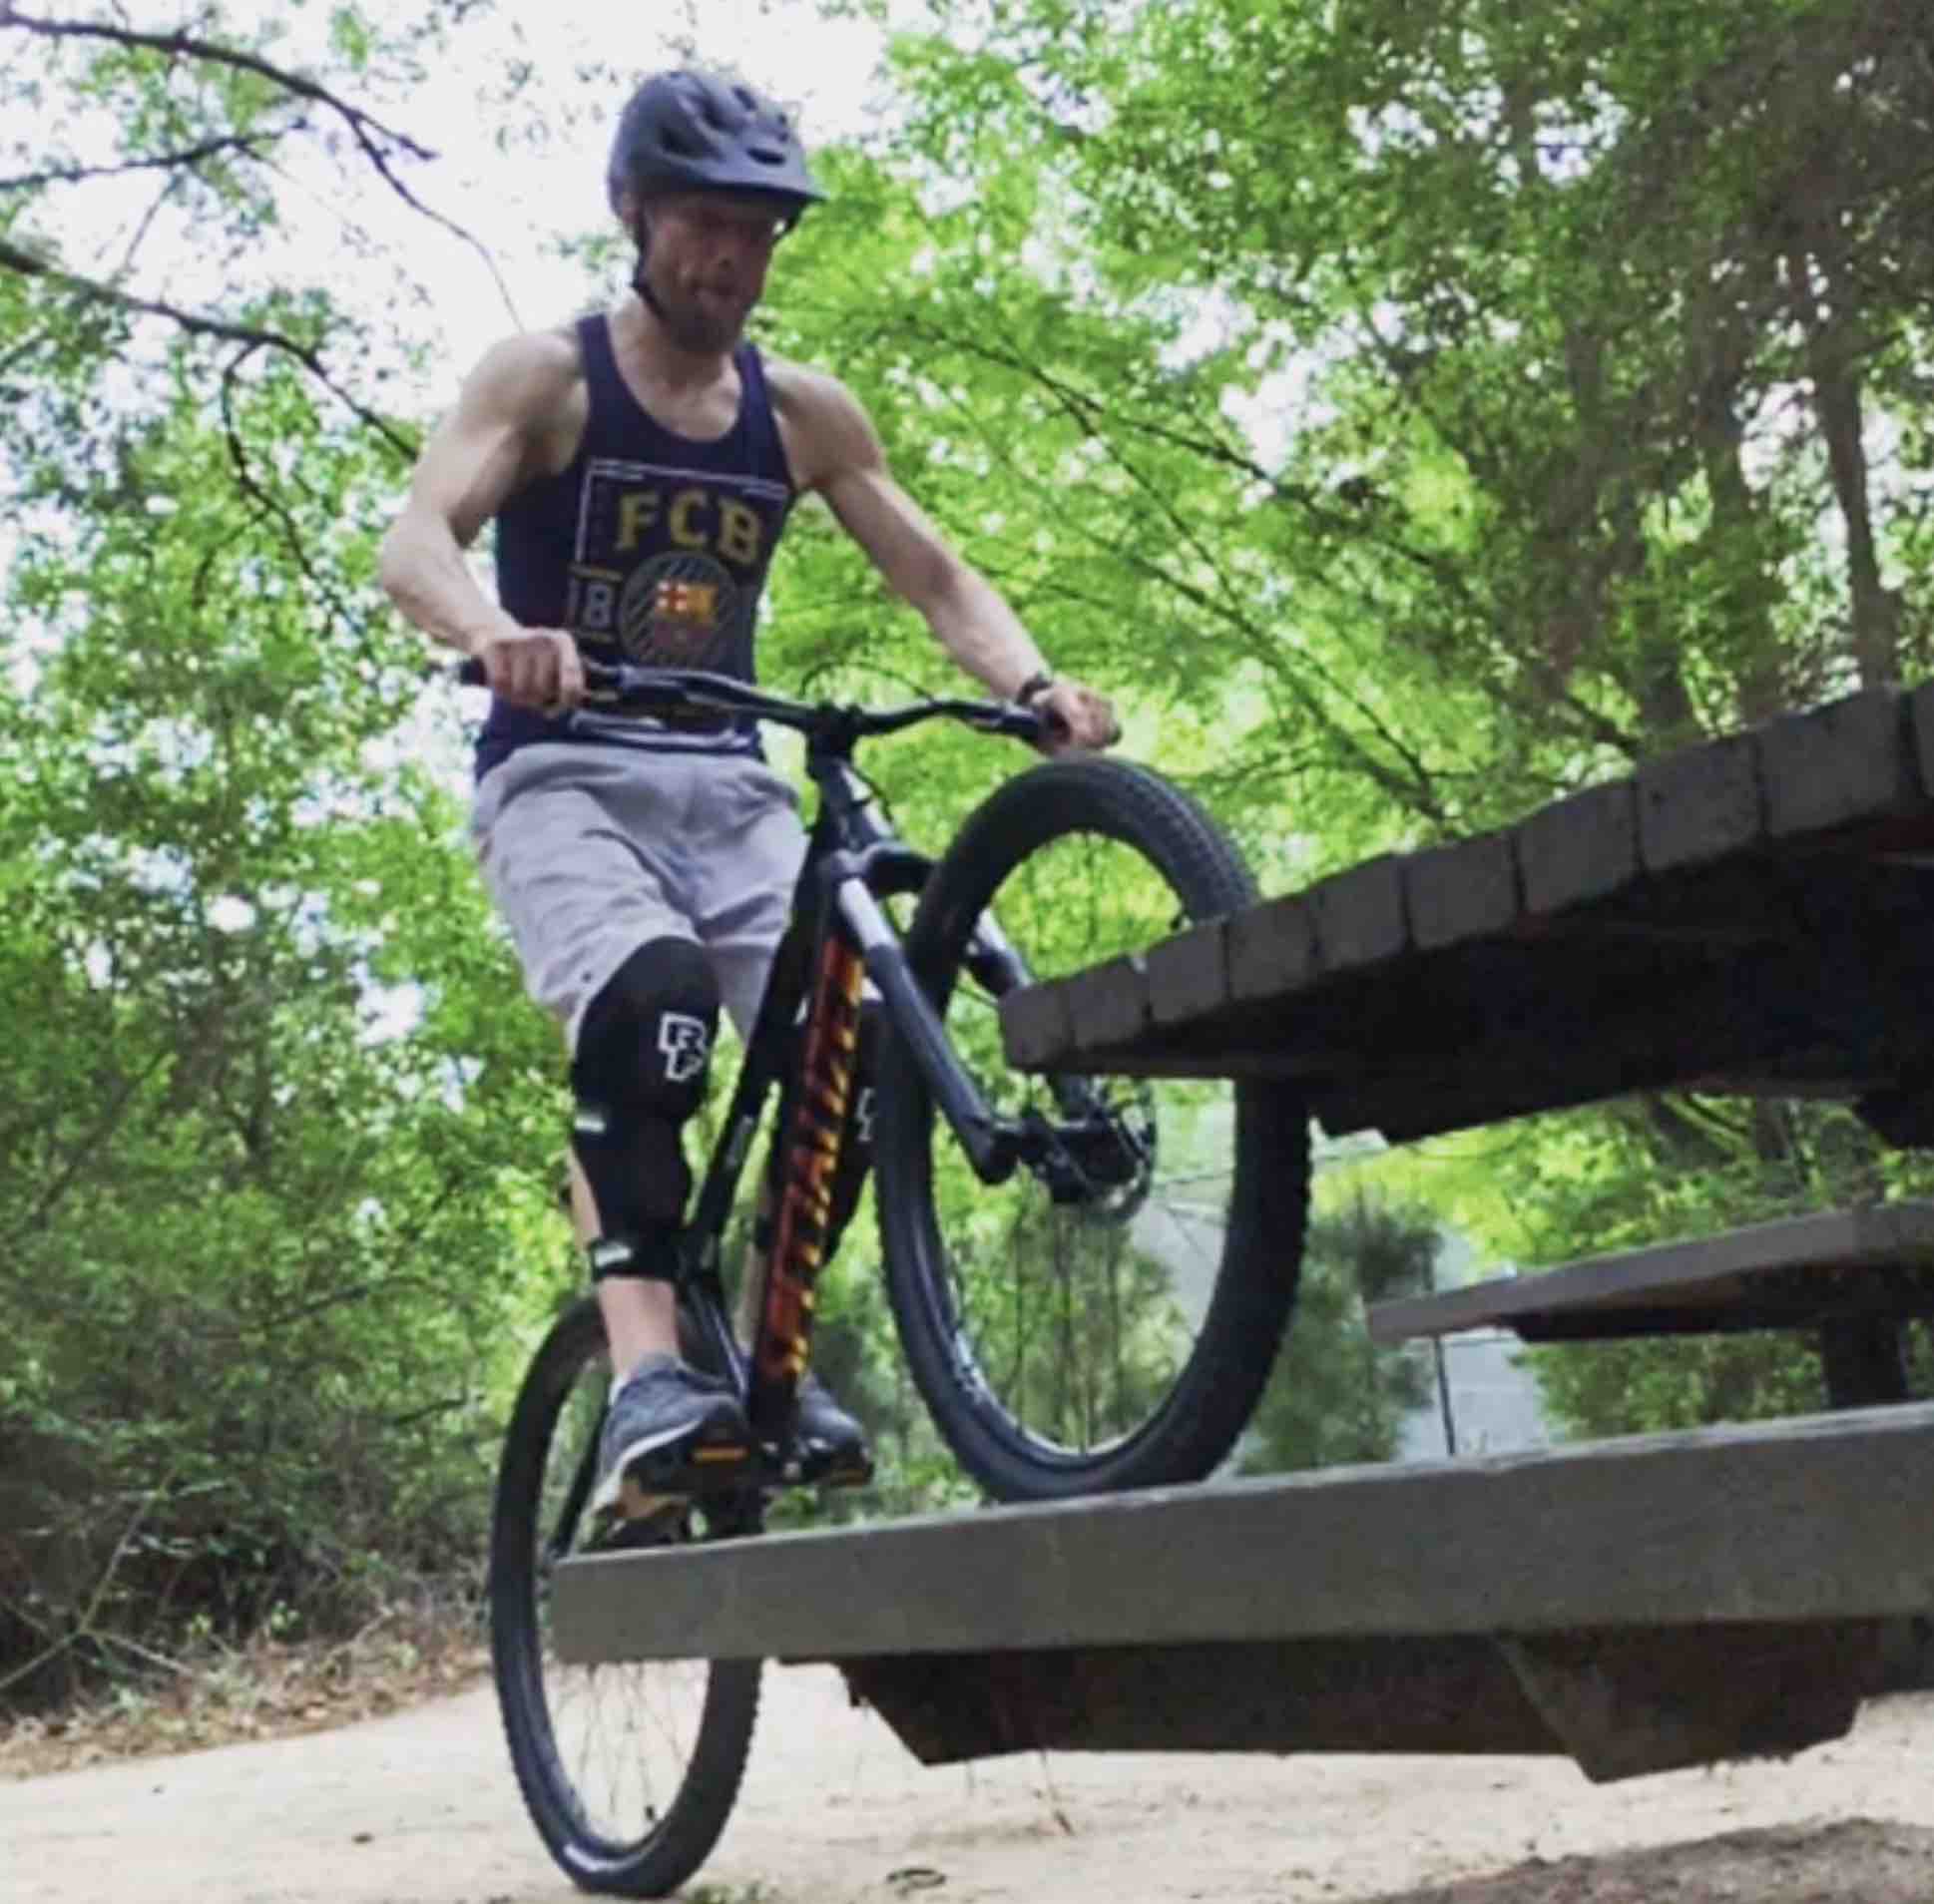 Person standing on a bicycle practicing against a picnic table